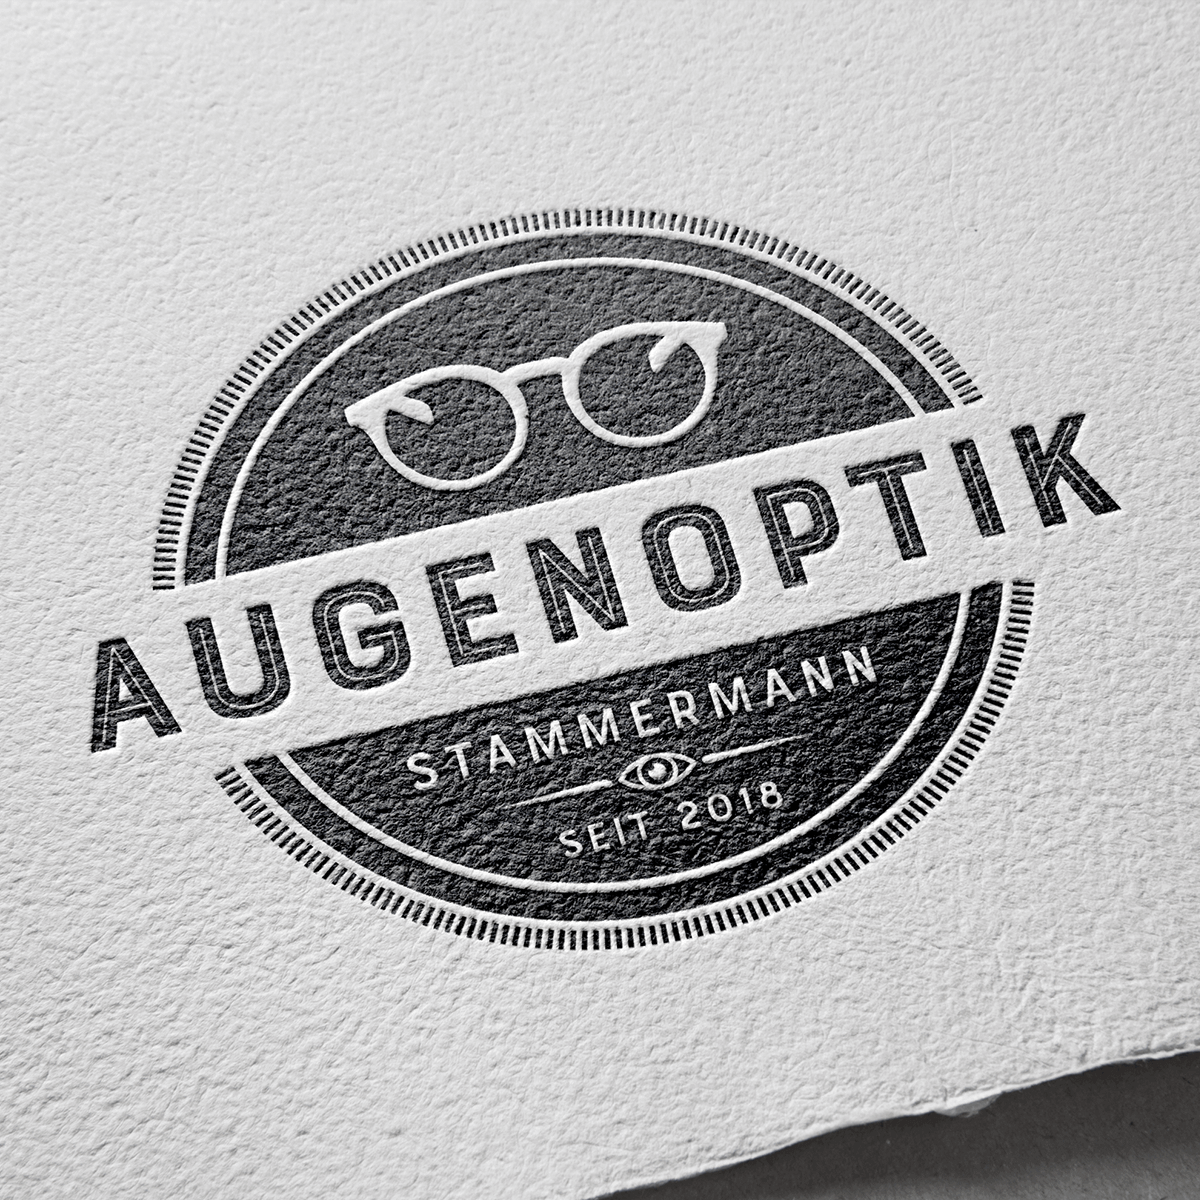 Read more about the article Augenoptik Stammermann